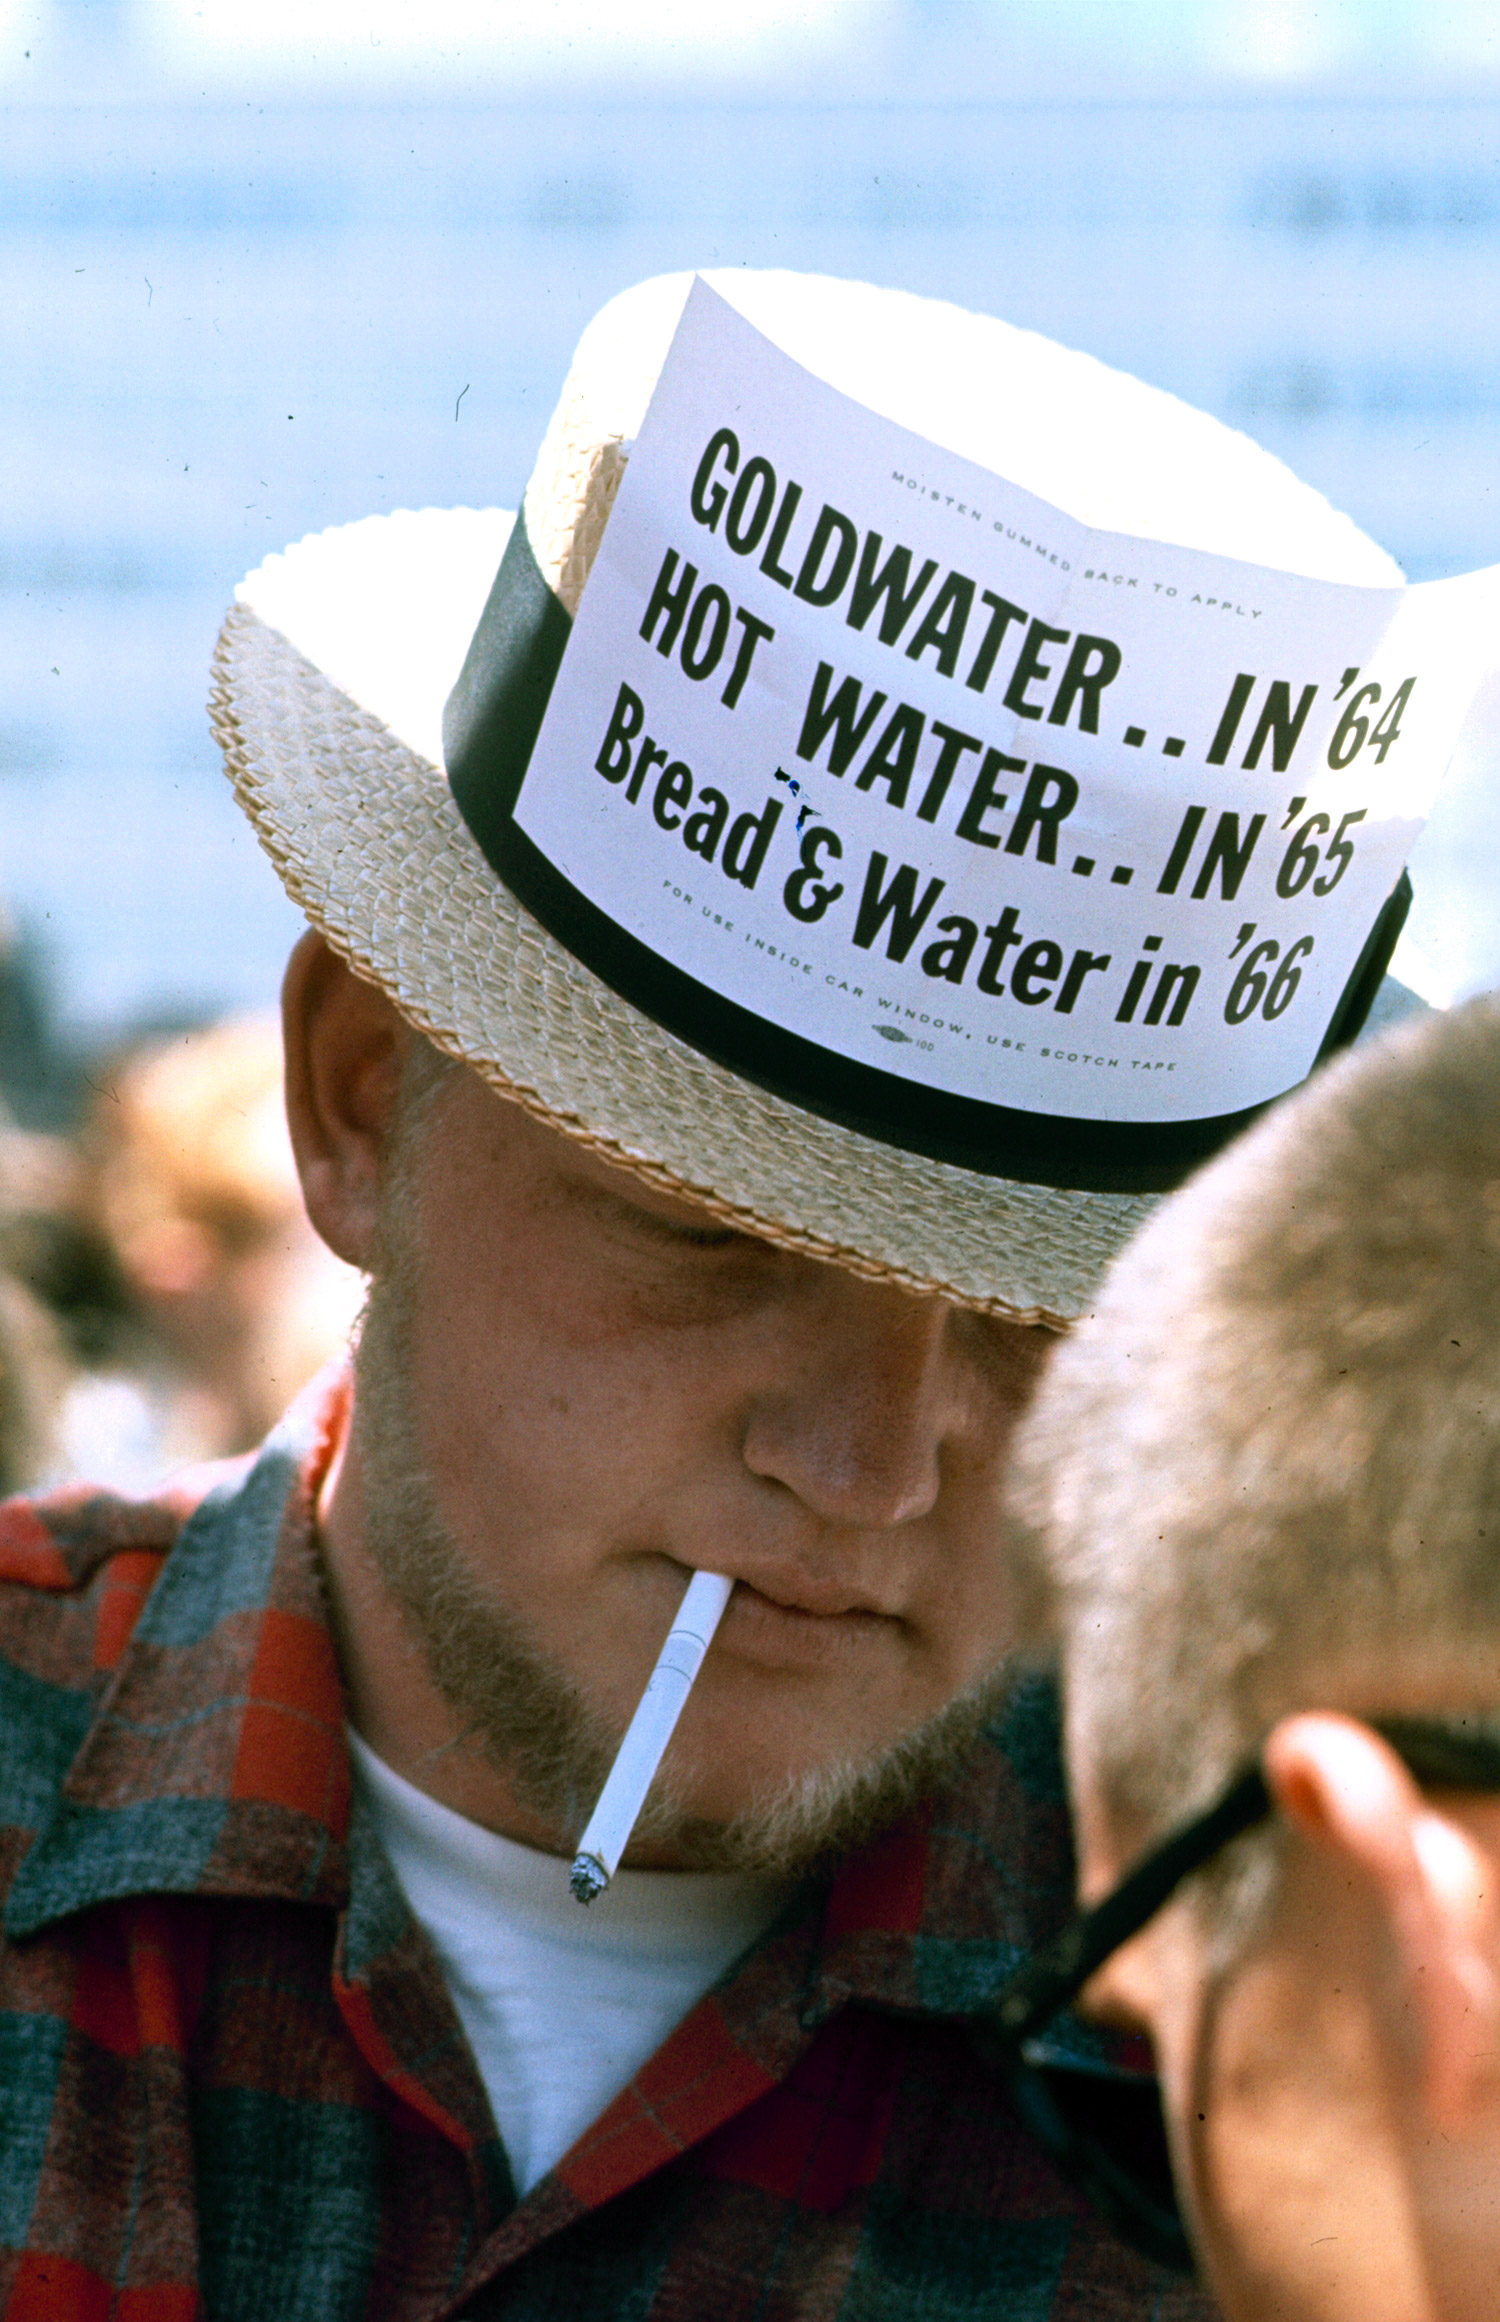 Barry Goldwater hat at the Republican National Convention, 1964.